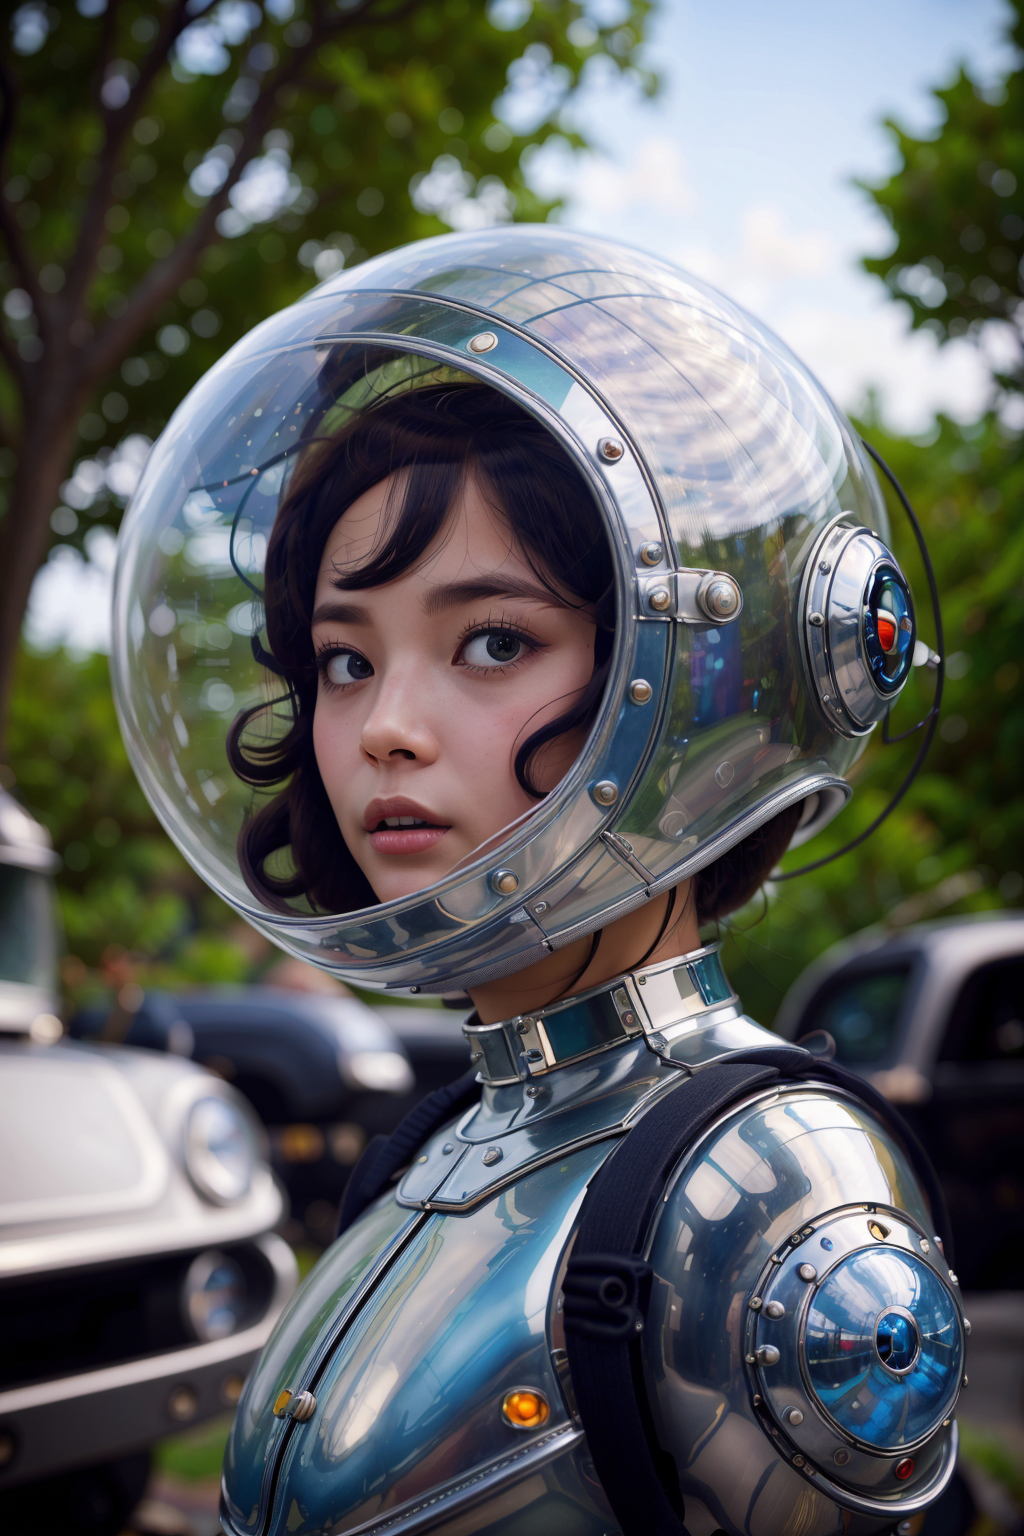 A woman wearing a silver space suit and helmet standing in front of a car.